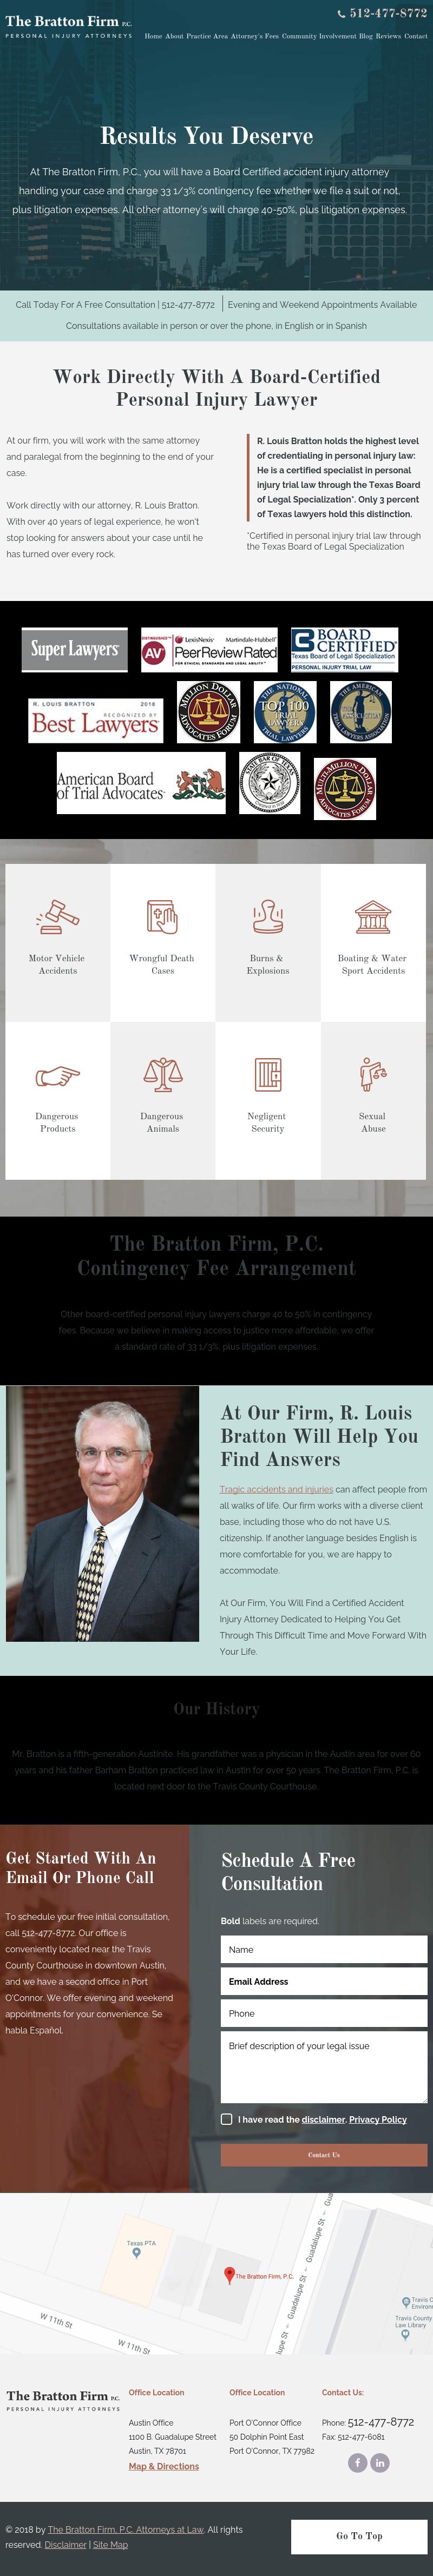 The Bratton Firm, P.C. Attorneys at Law - Austin TX Lawyers